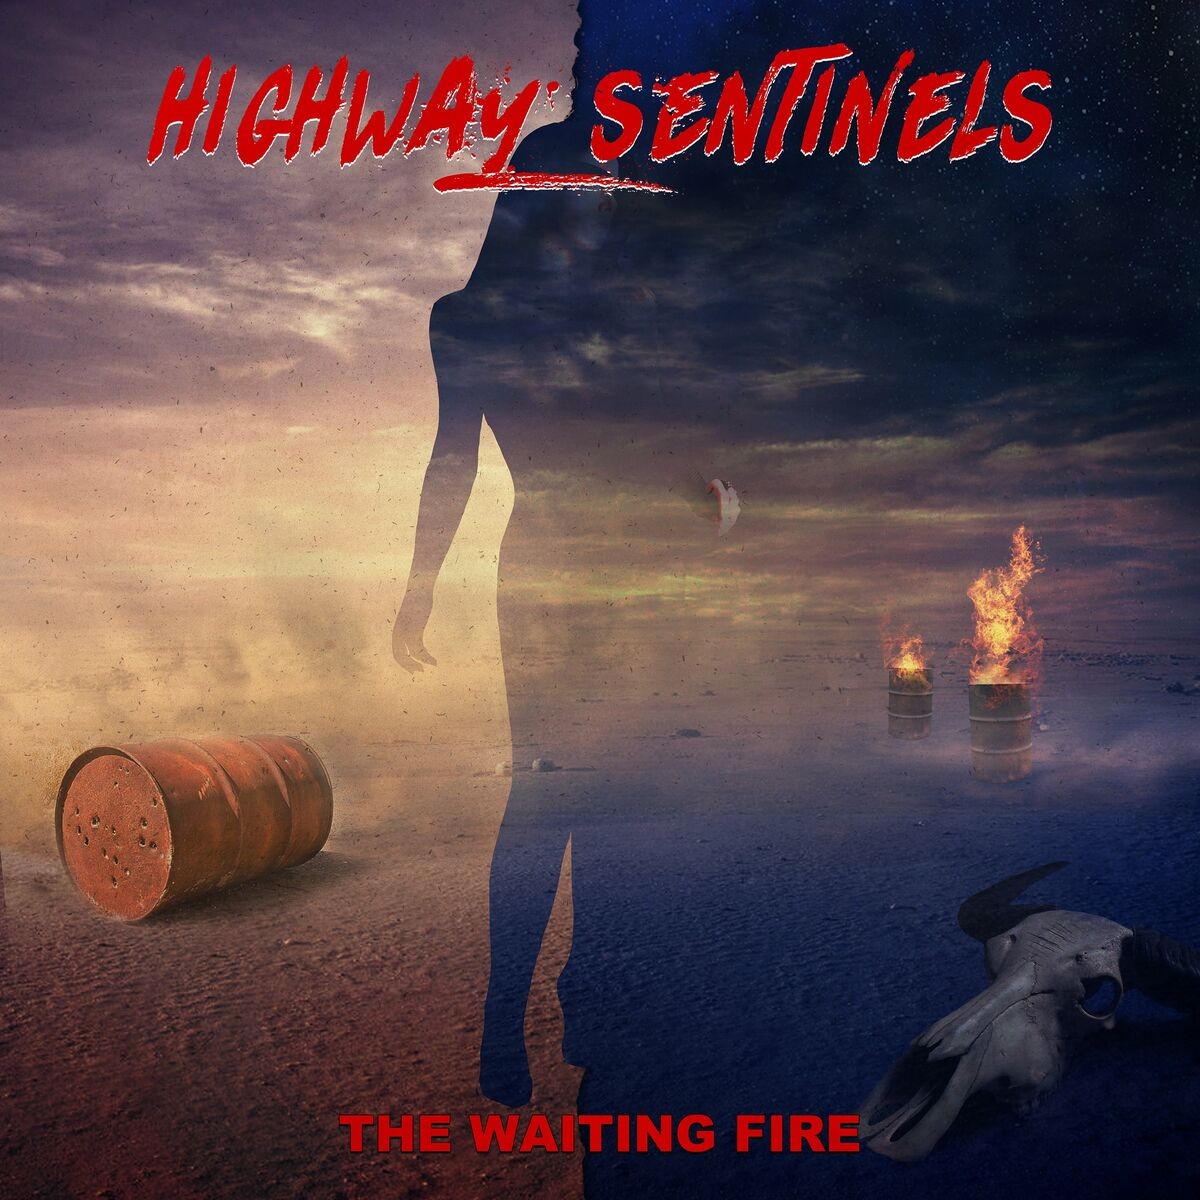 Highway Sentinels - The Waiting Fire (2022) 24bit FLAC Download